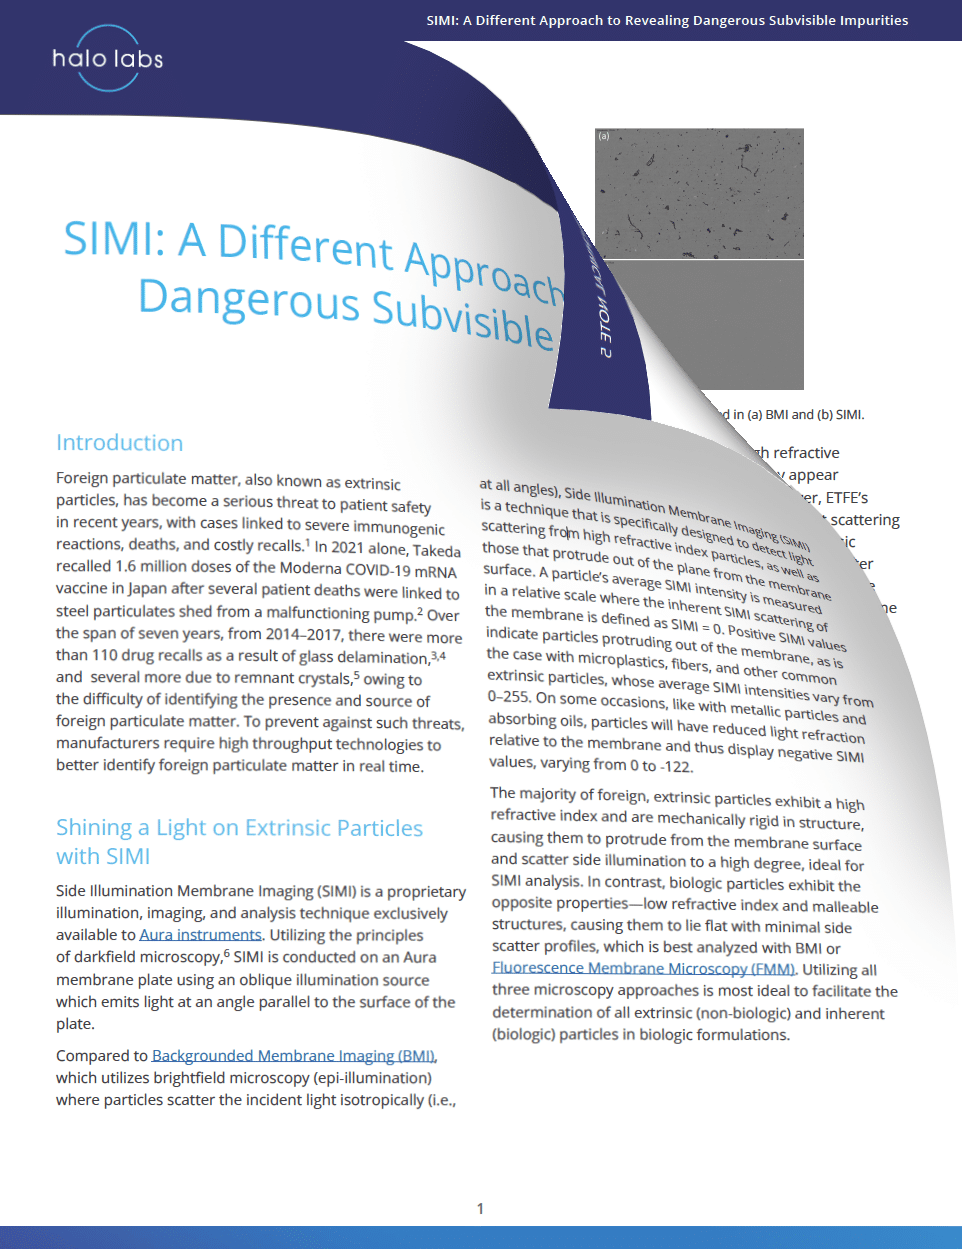 Tech Note 5: SIMI: A Different Approach to Revealing Dangerous Subvisible Impurities